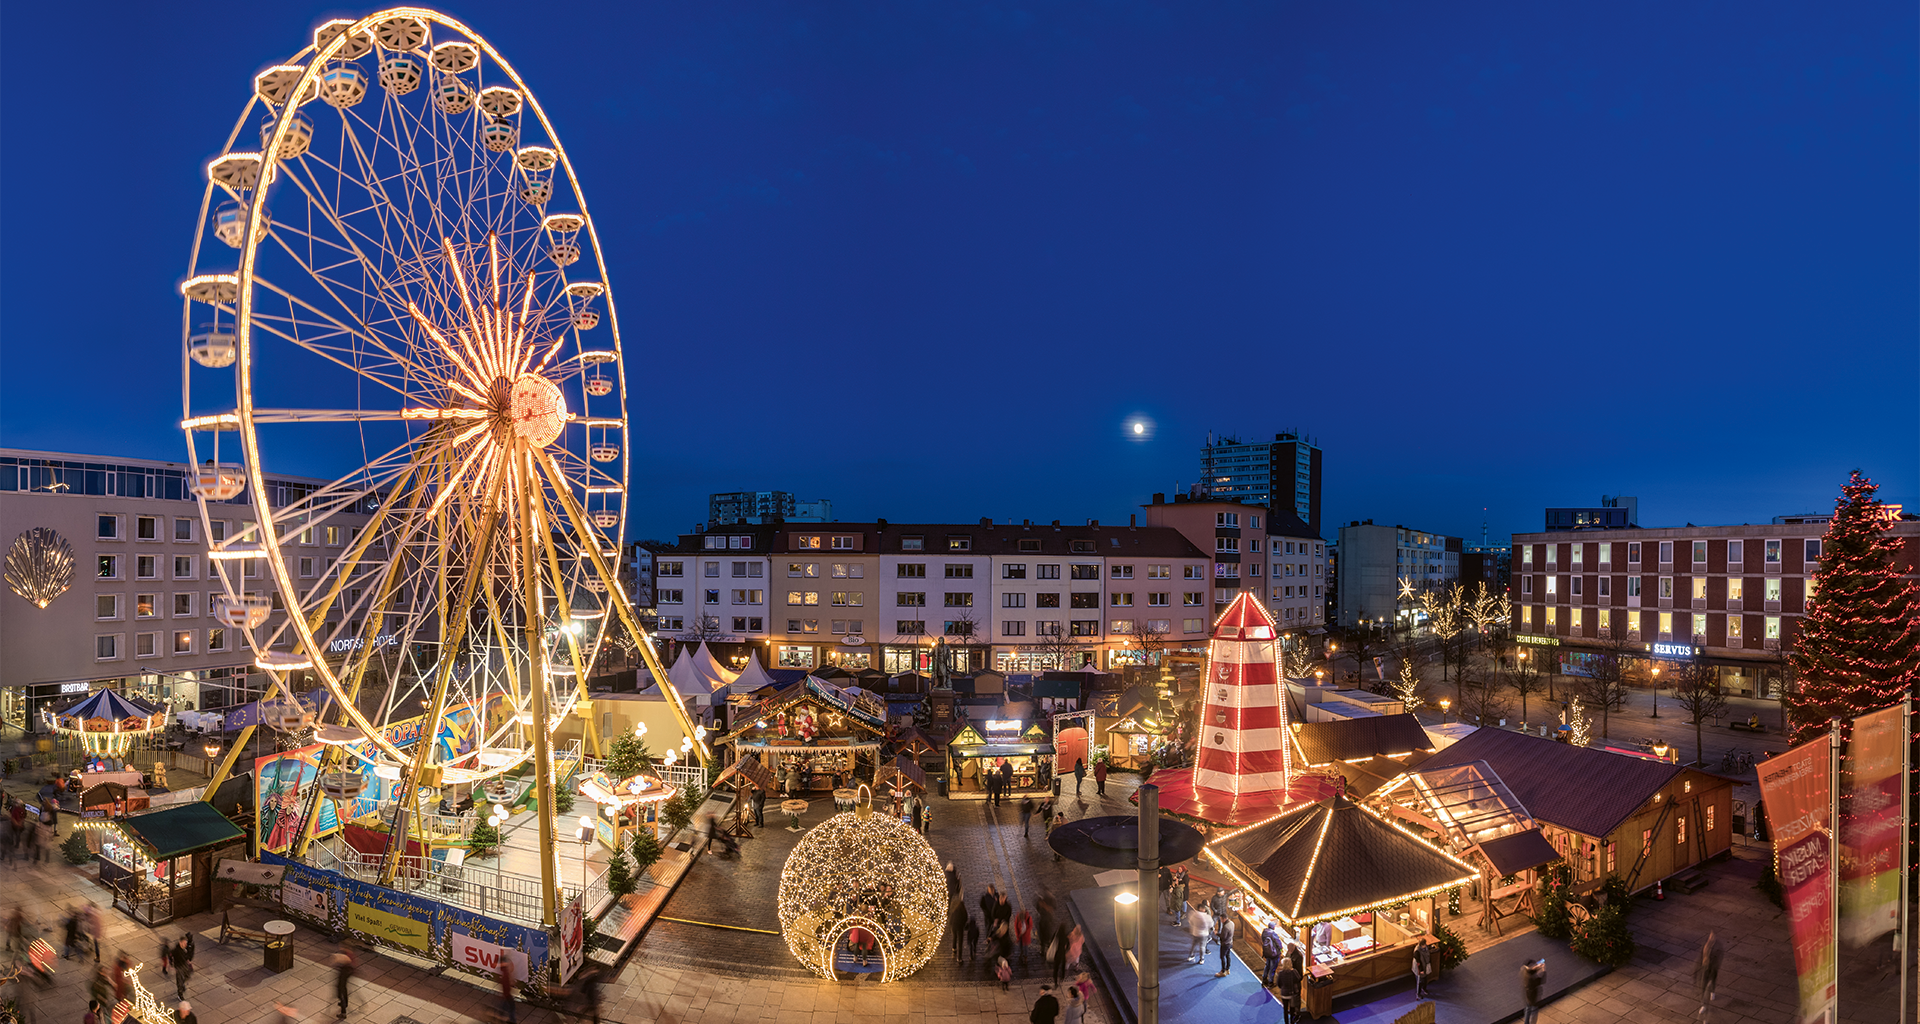 A Christmas market with stalls.